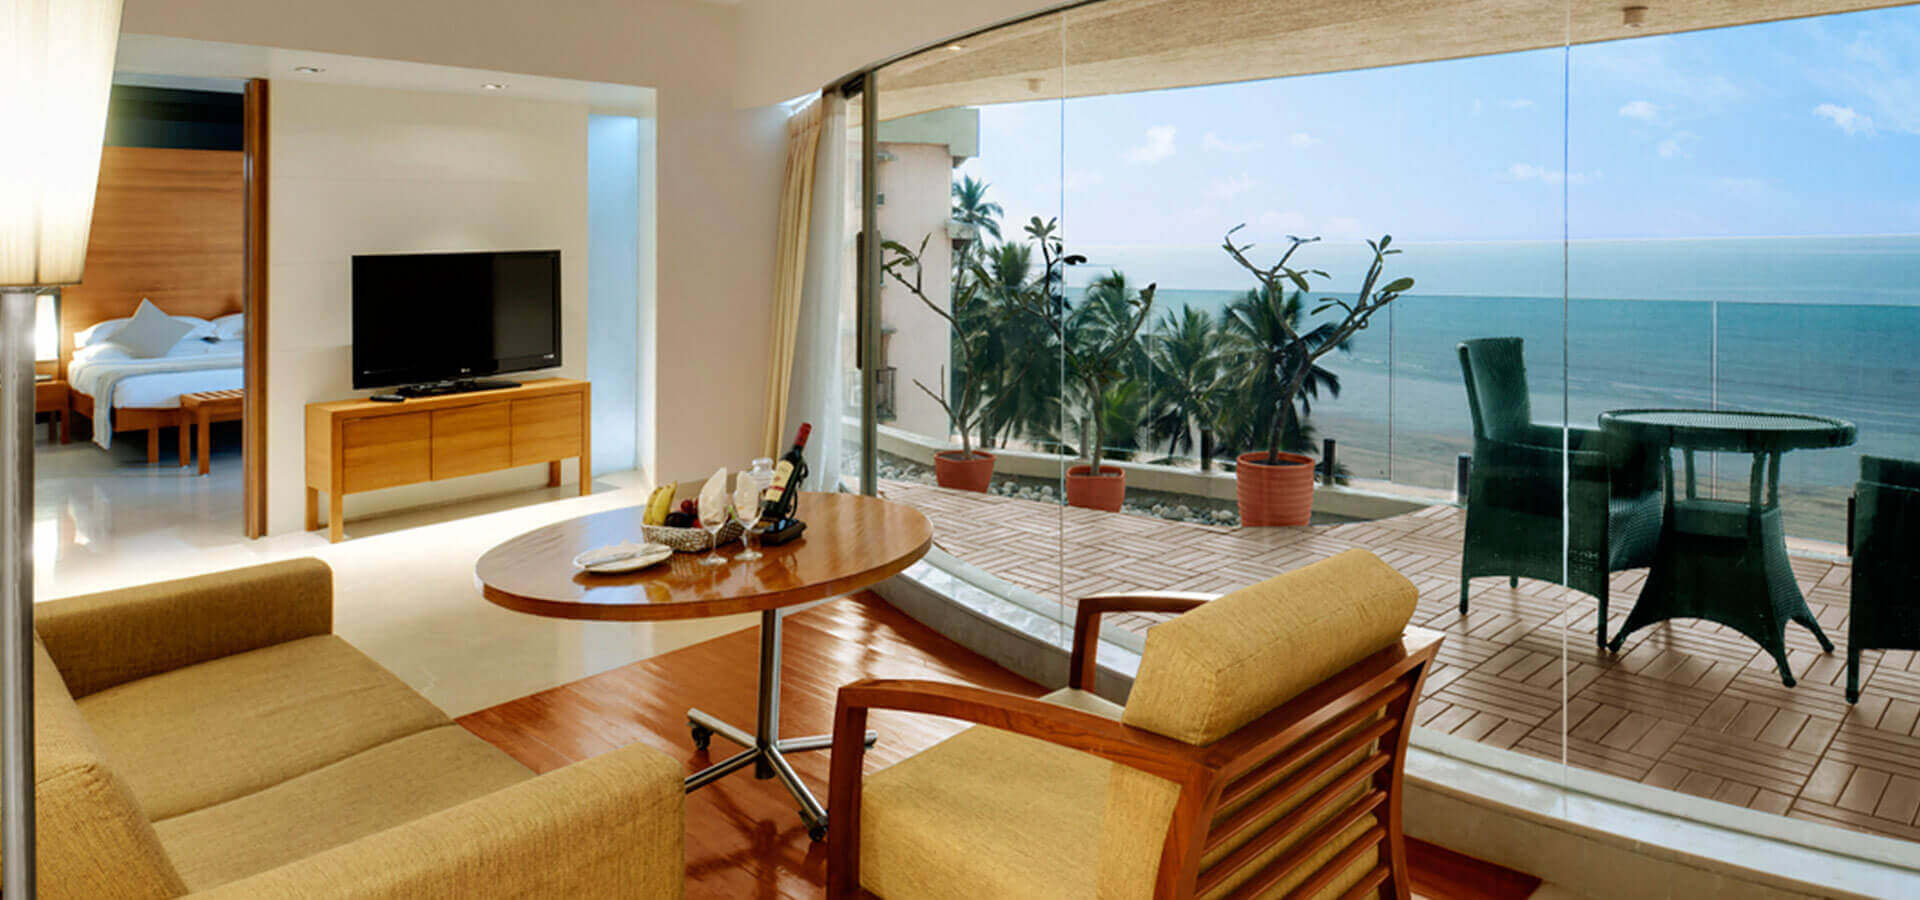 luxury hotels in Juhu, hotels with suite rooms in Juhu